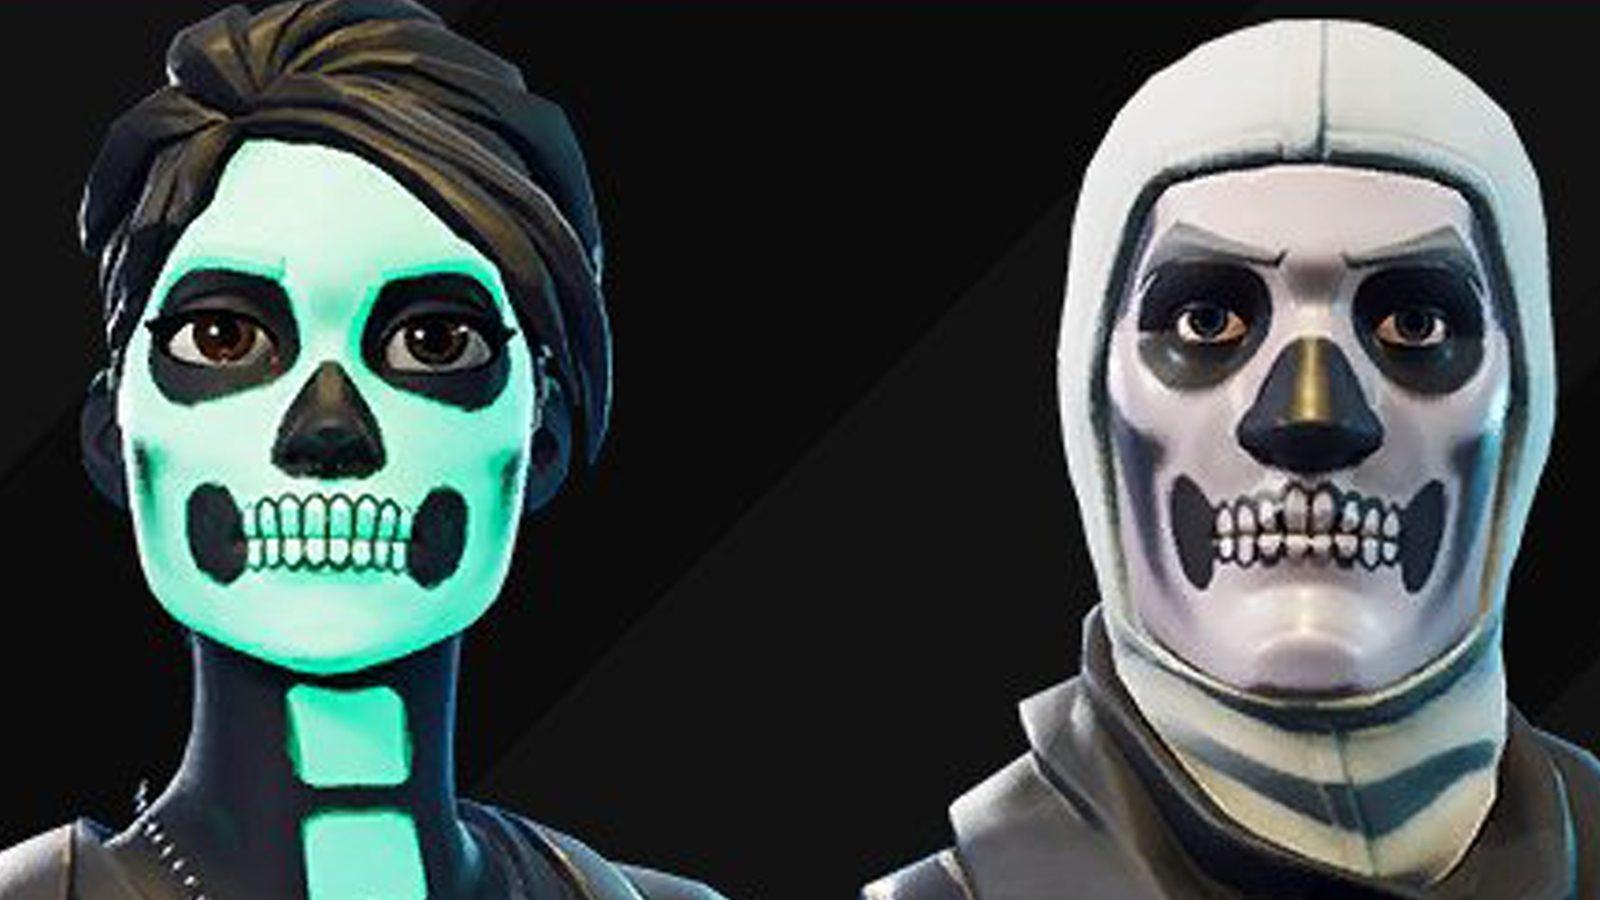 Skull Trooper skin is finally back in Fortnite and you can